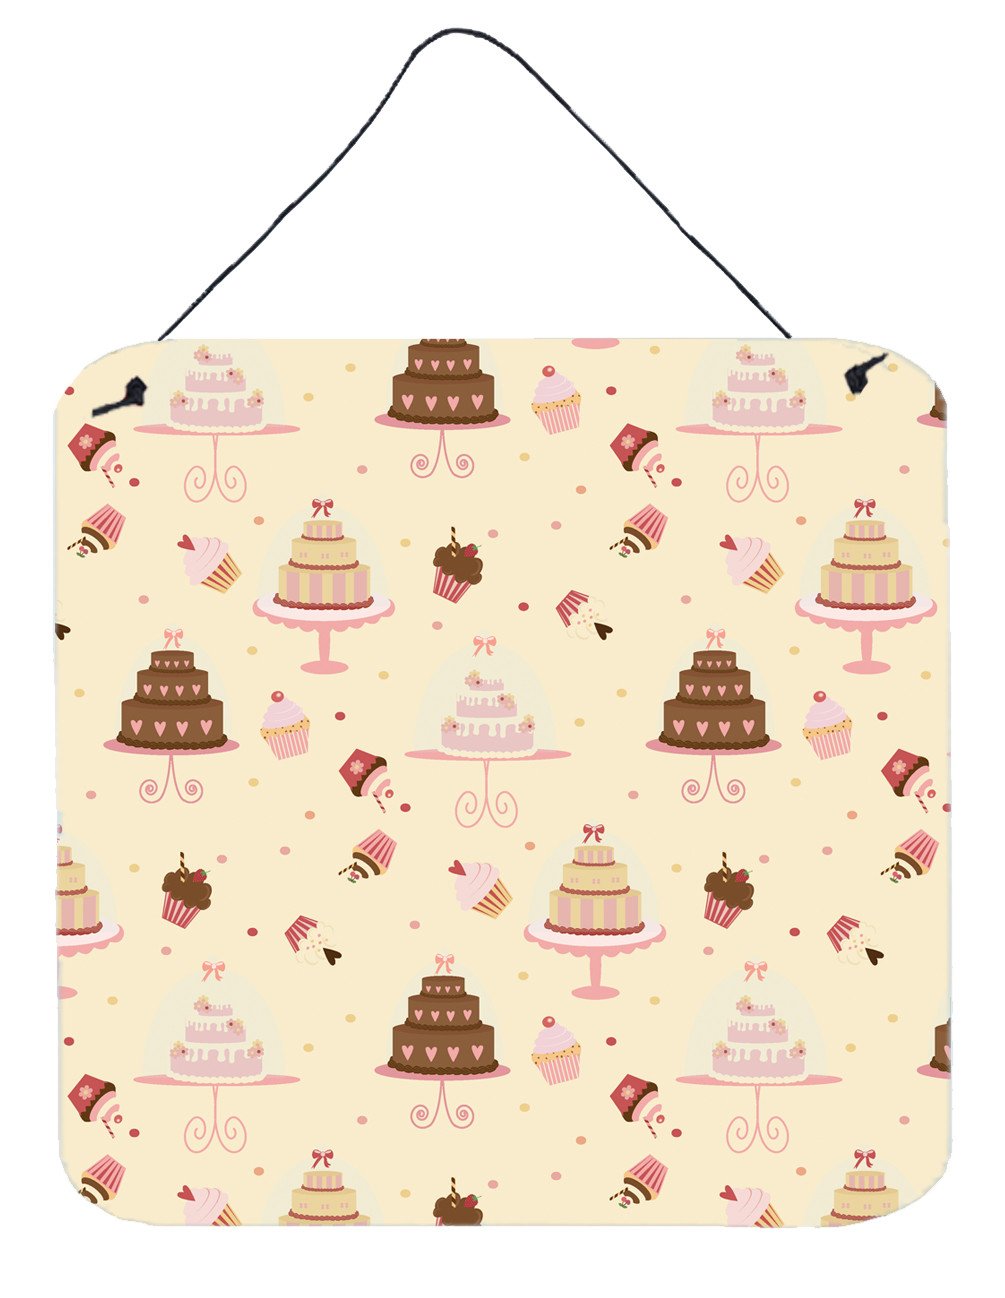 Cakes and Cupcakes Wall or Door Hanging Prints BB7310DS66 by Caroline's Treasures